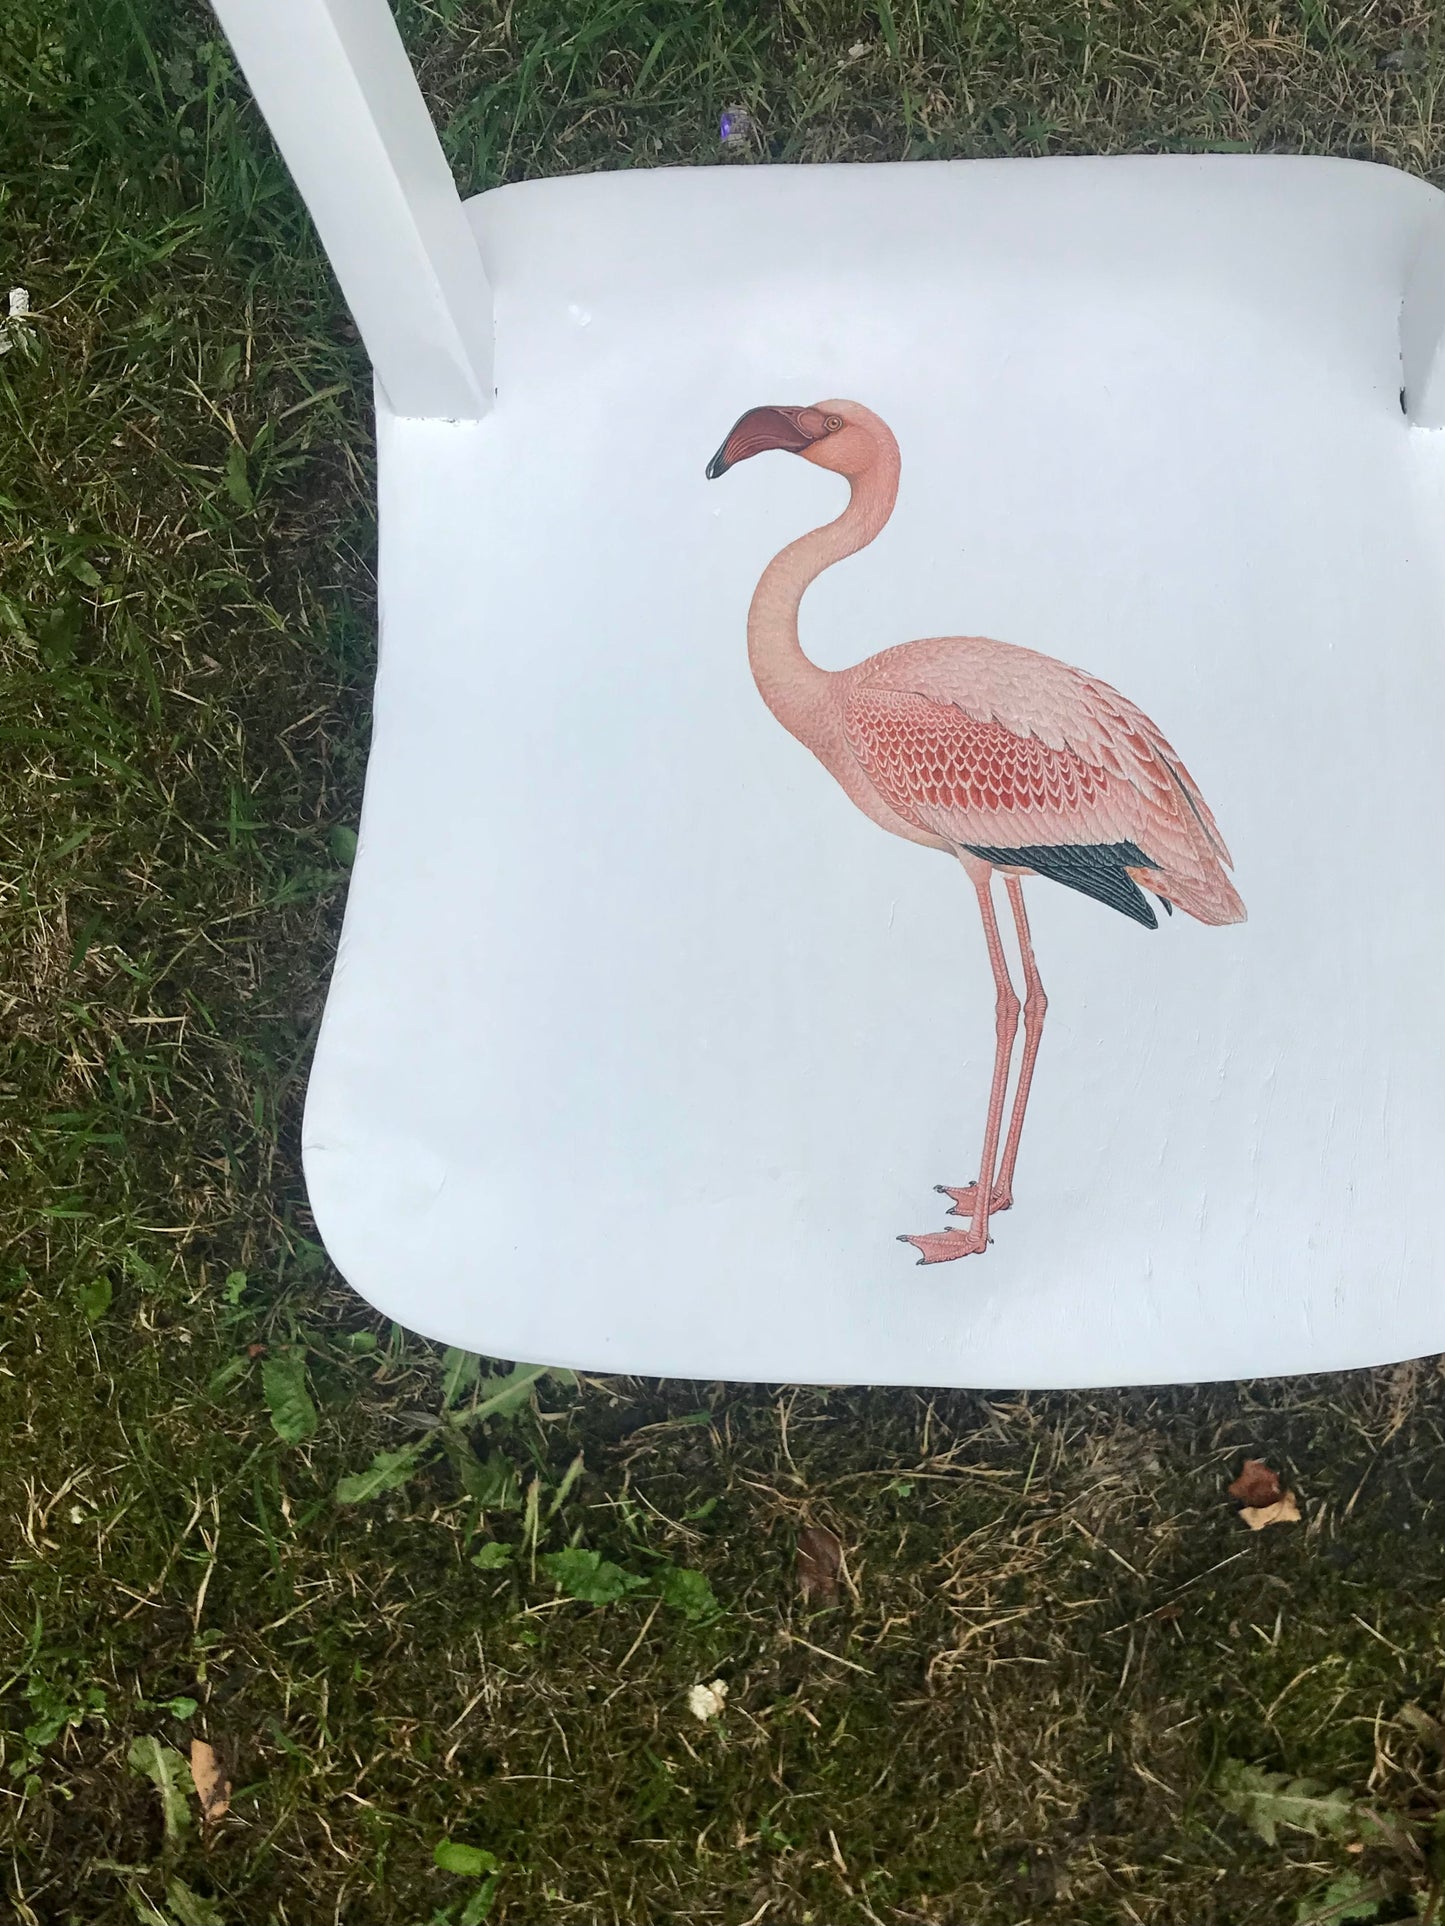 Children's personalised upcycled wooden nursery school chair with vintage flamingo theme and your child's name